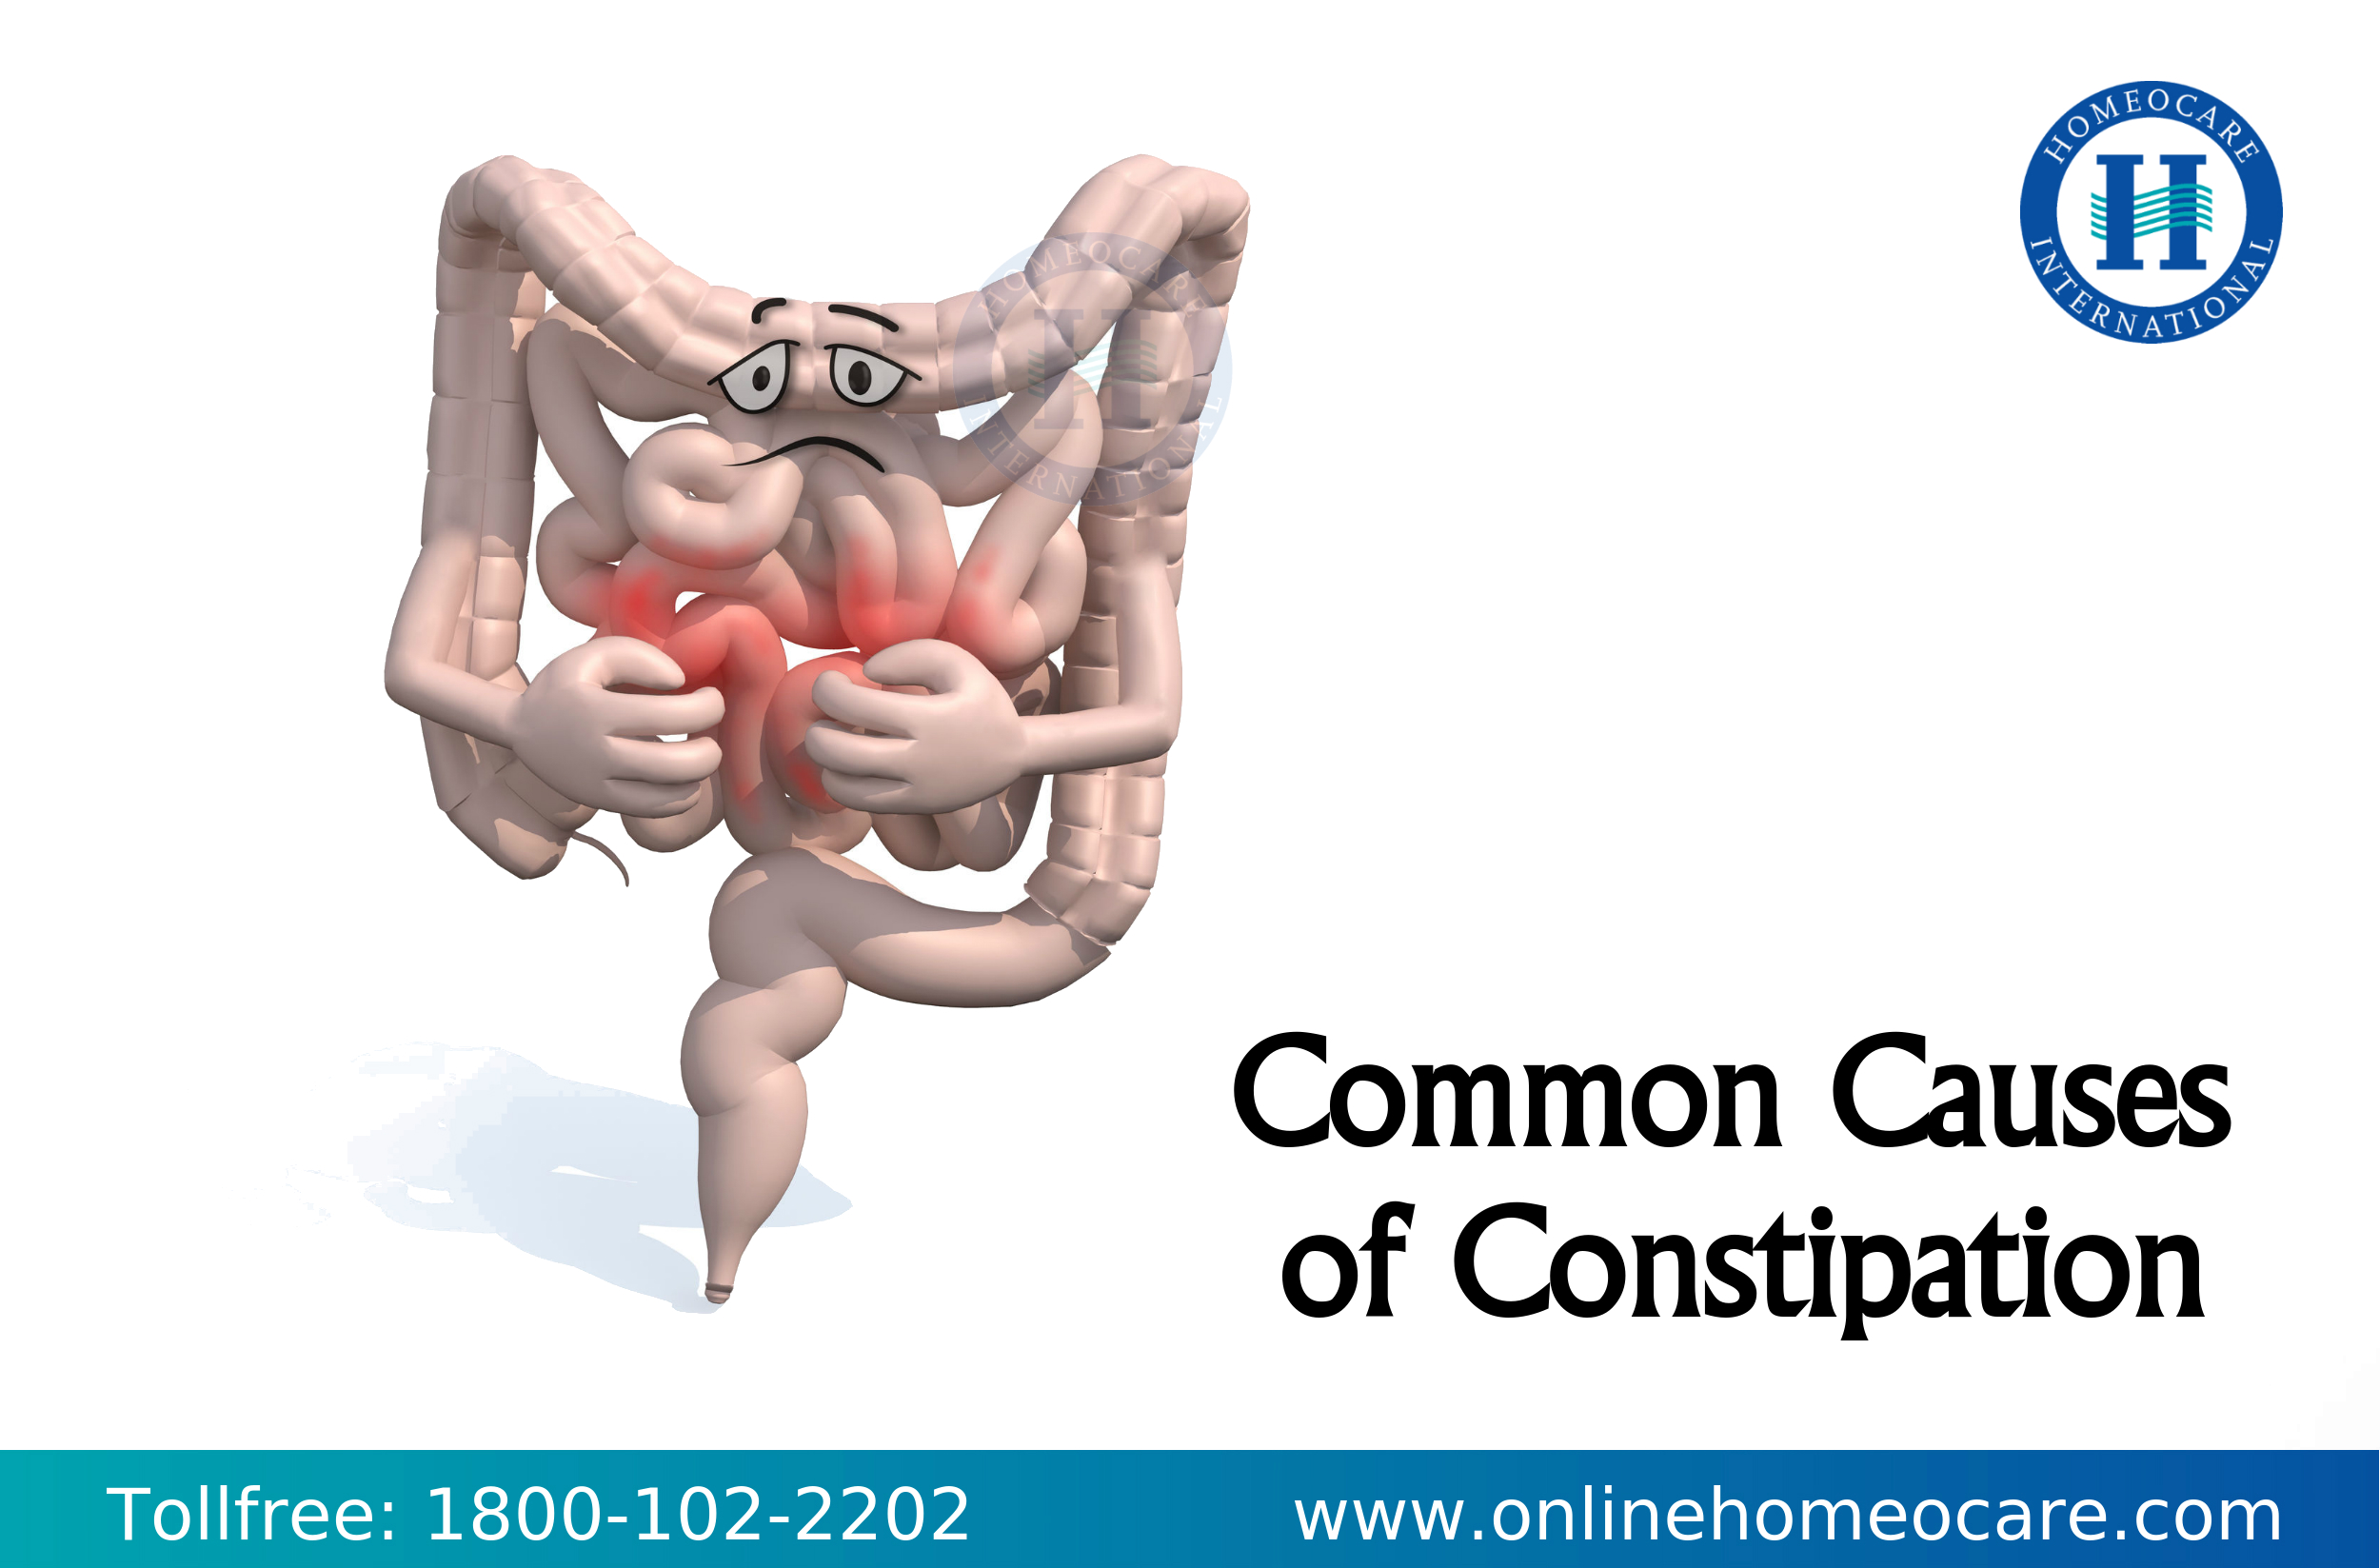 Common causes of constipation